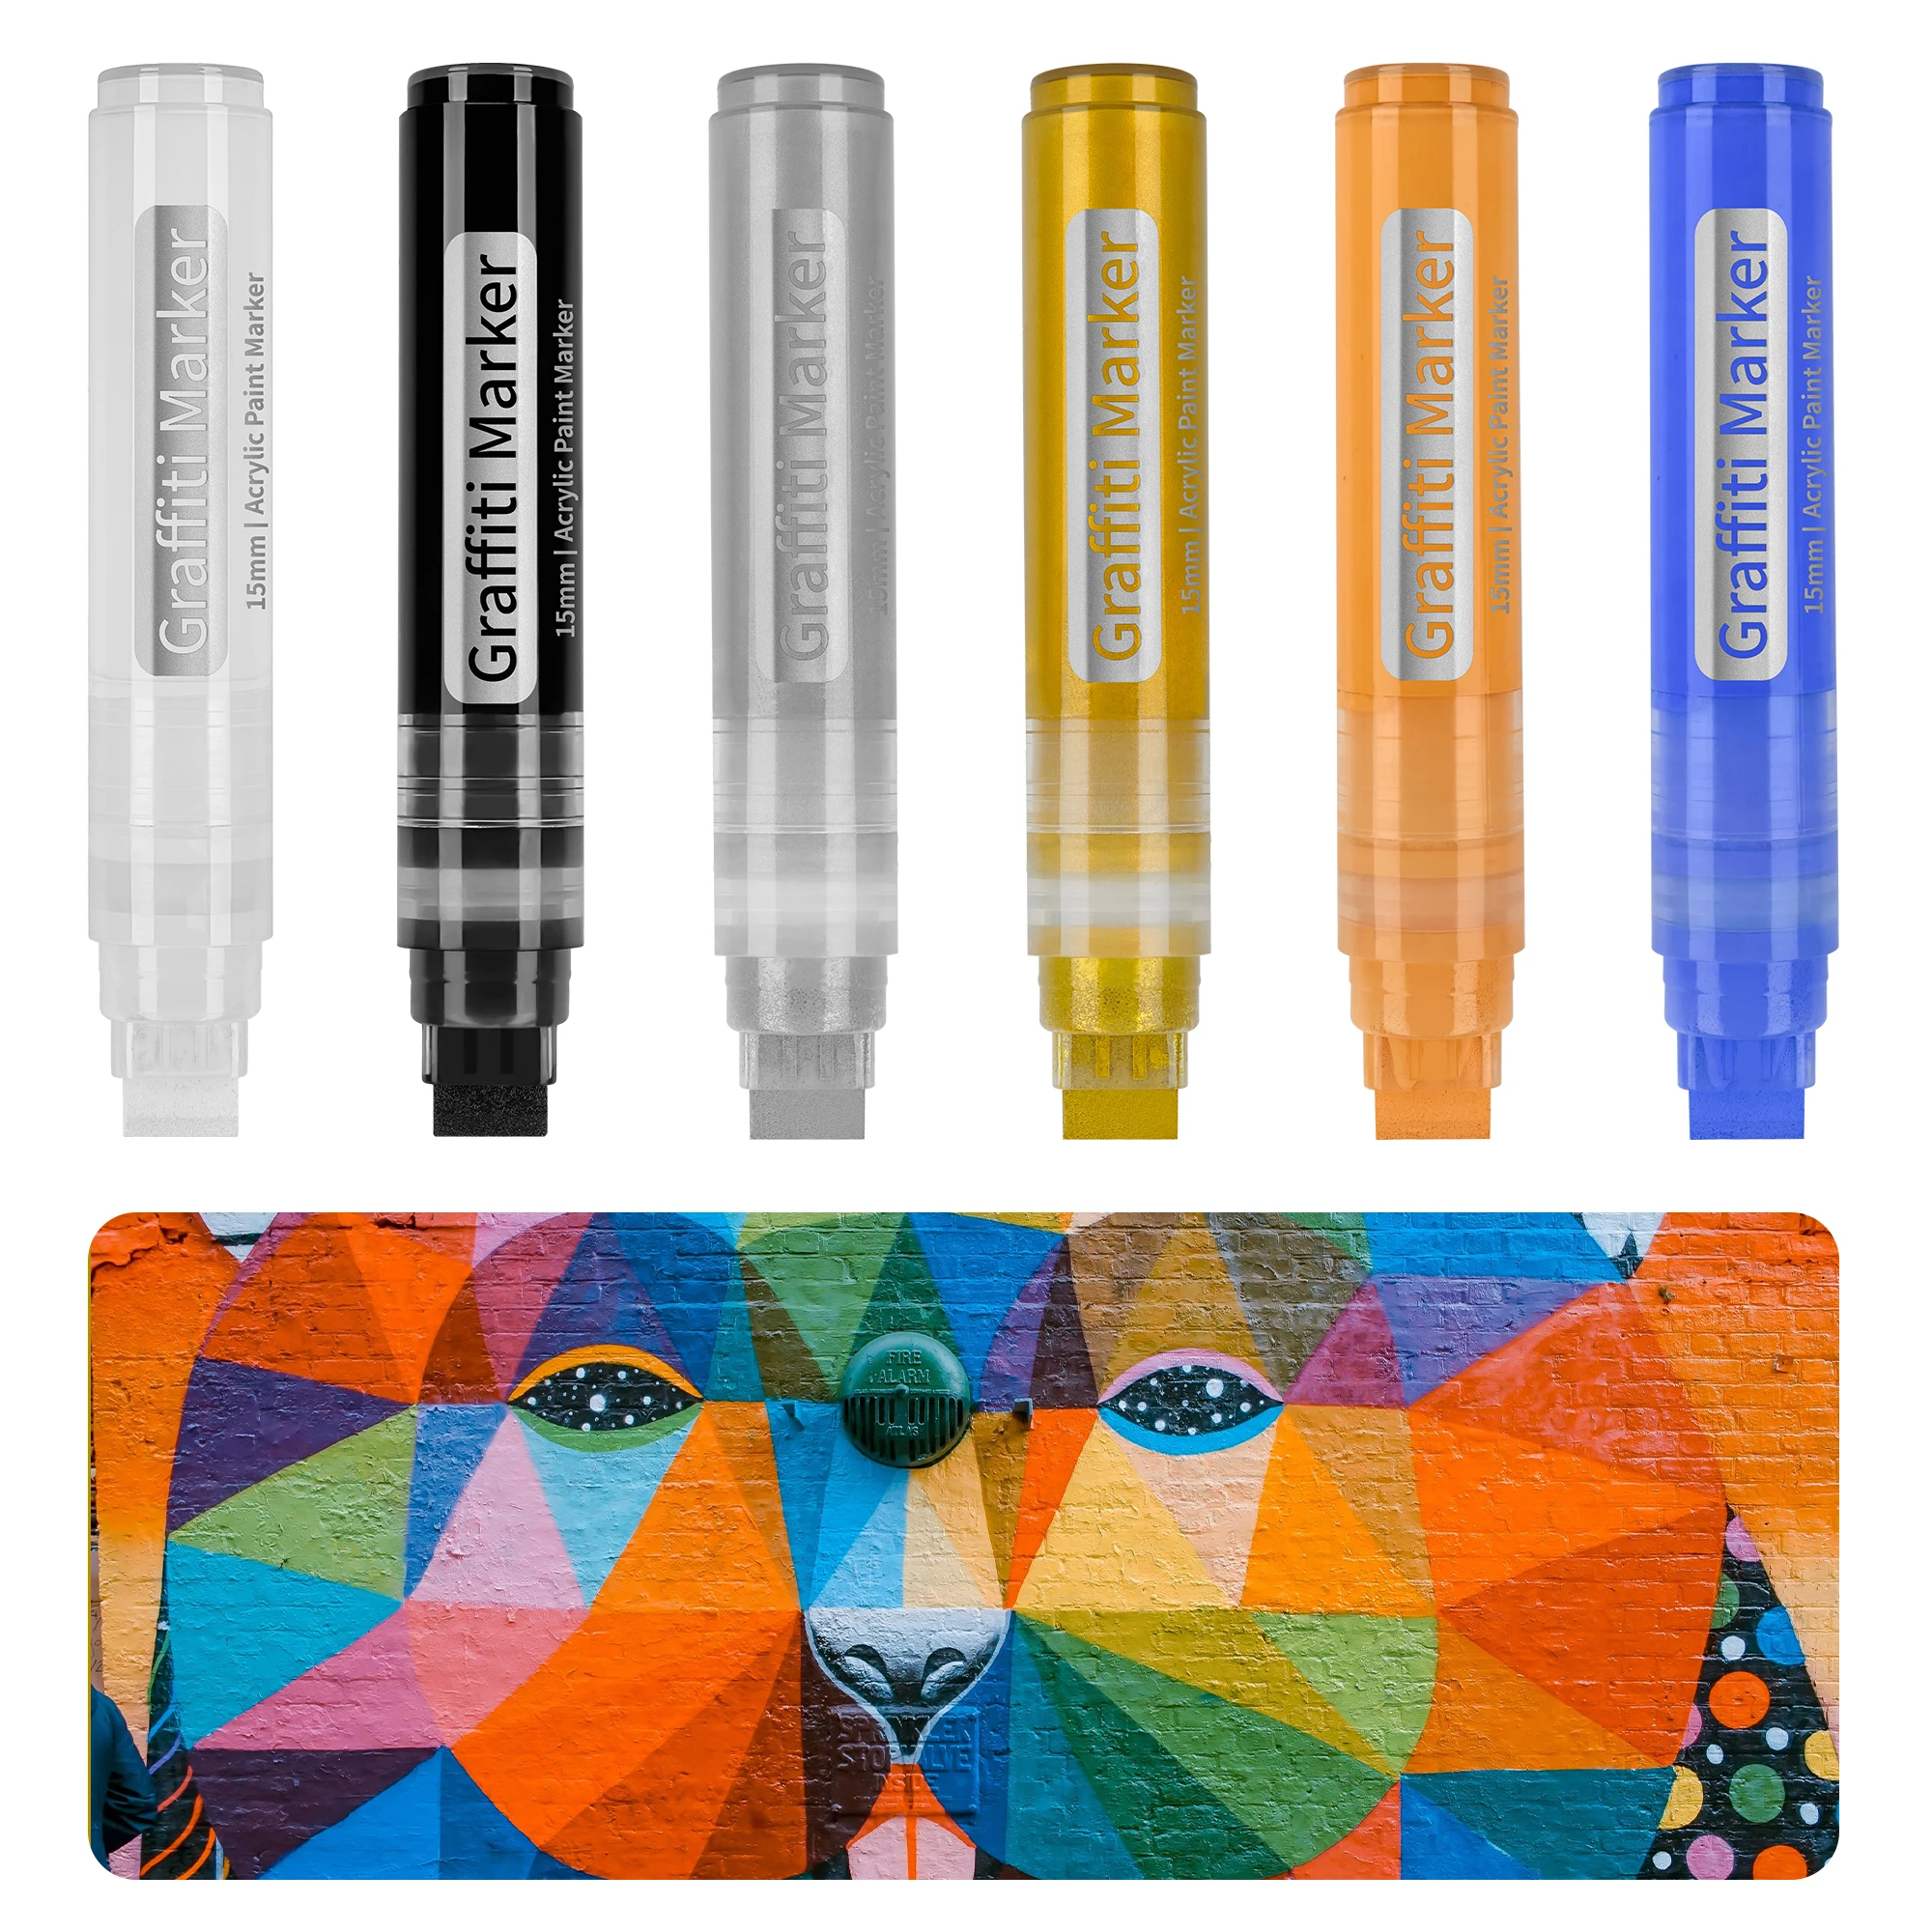 Acrylic Paint Pen permanent marker Jumbo size Water Based Waterproof Ink Paint Marker for DIY Rock Painting